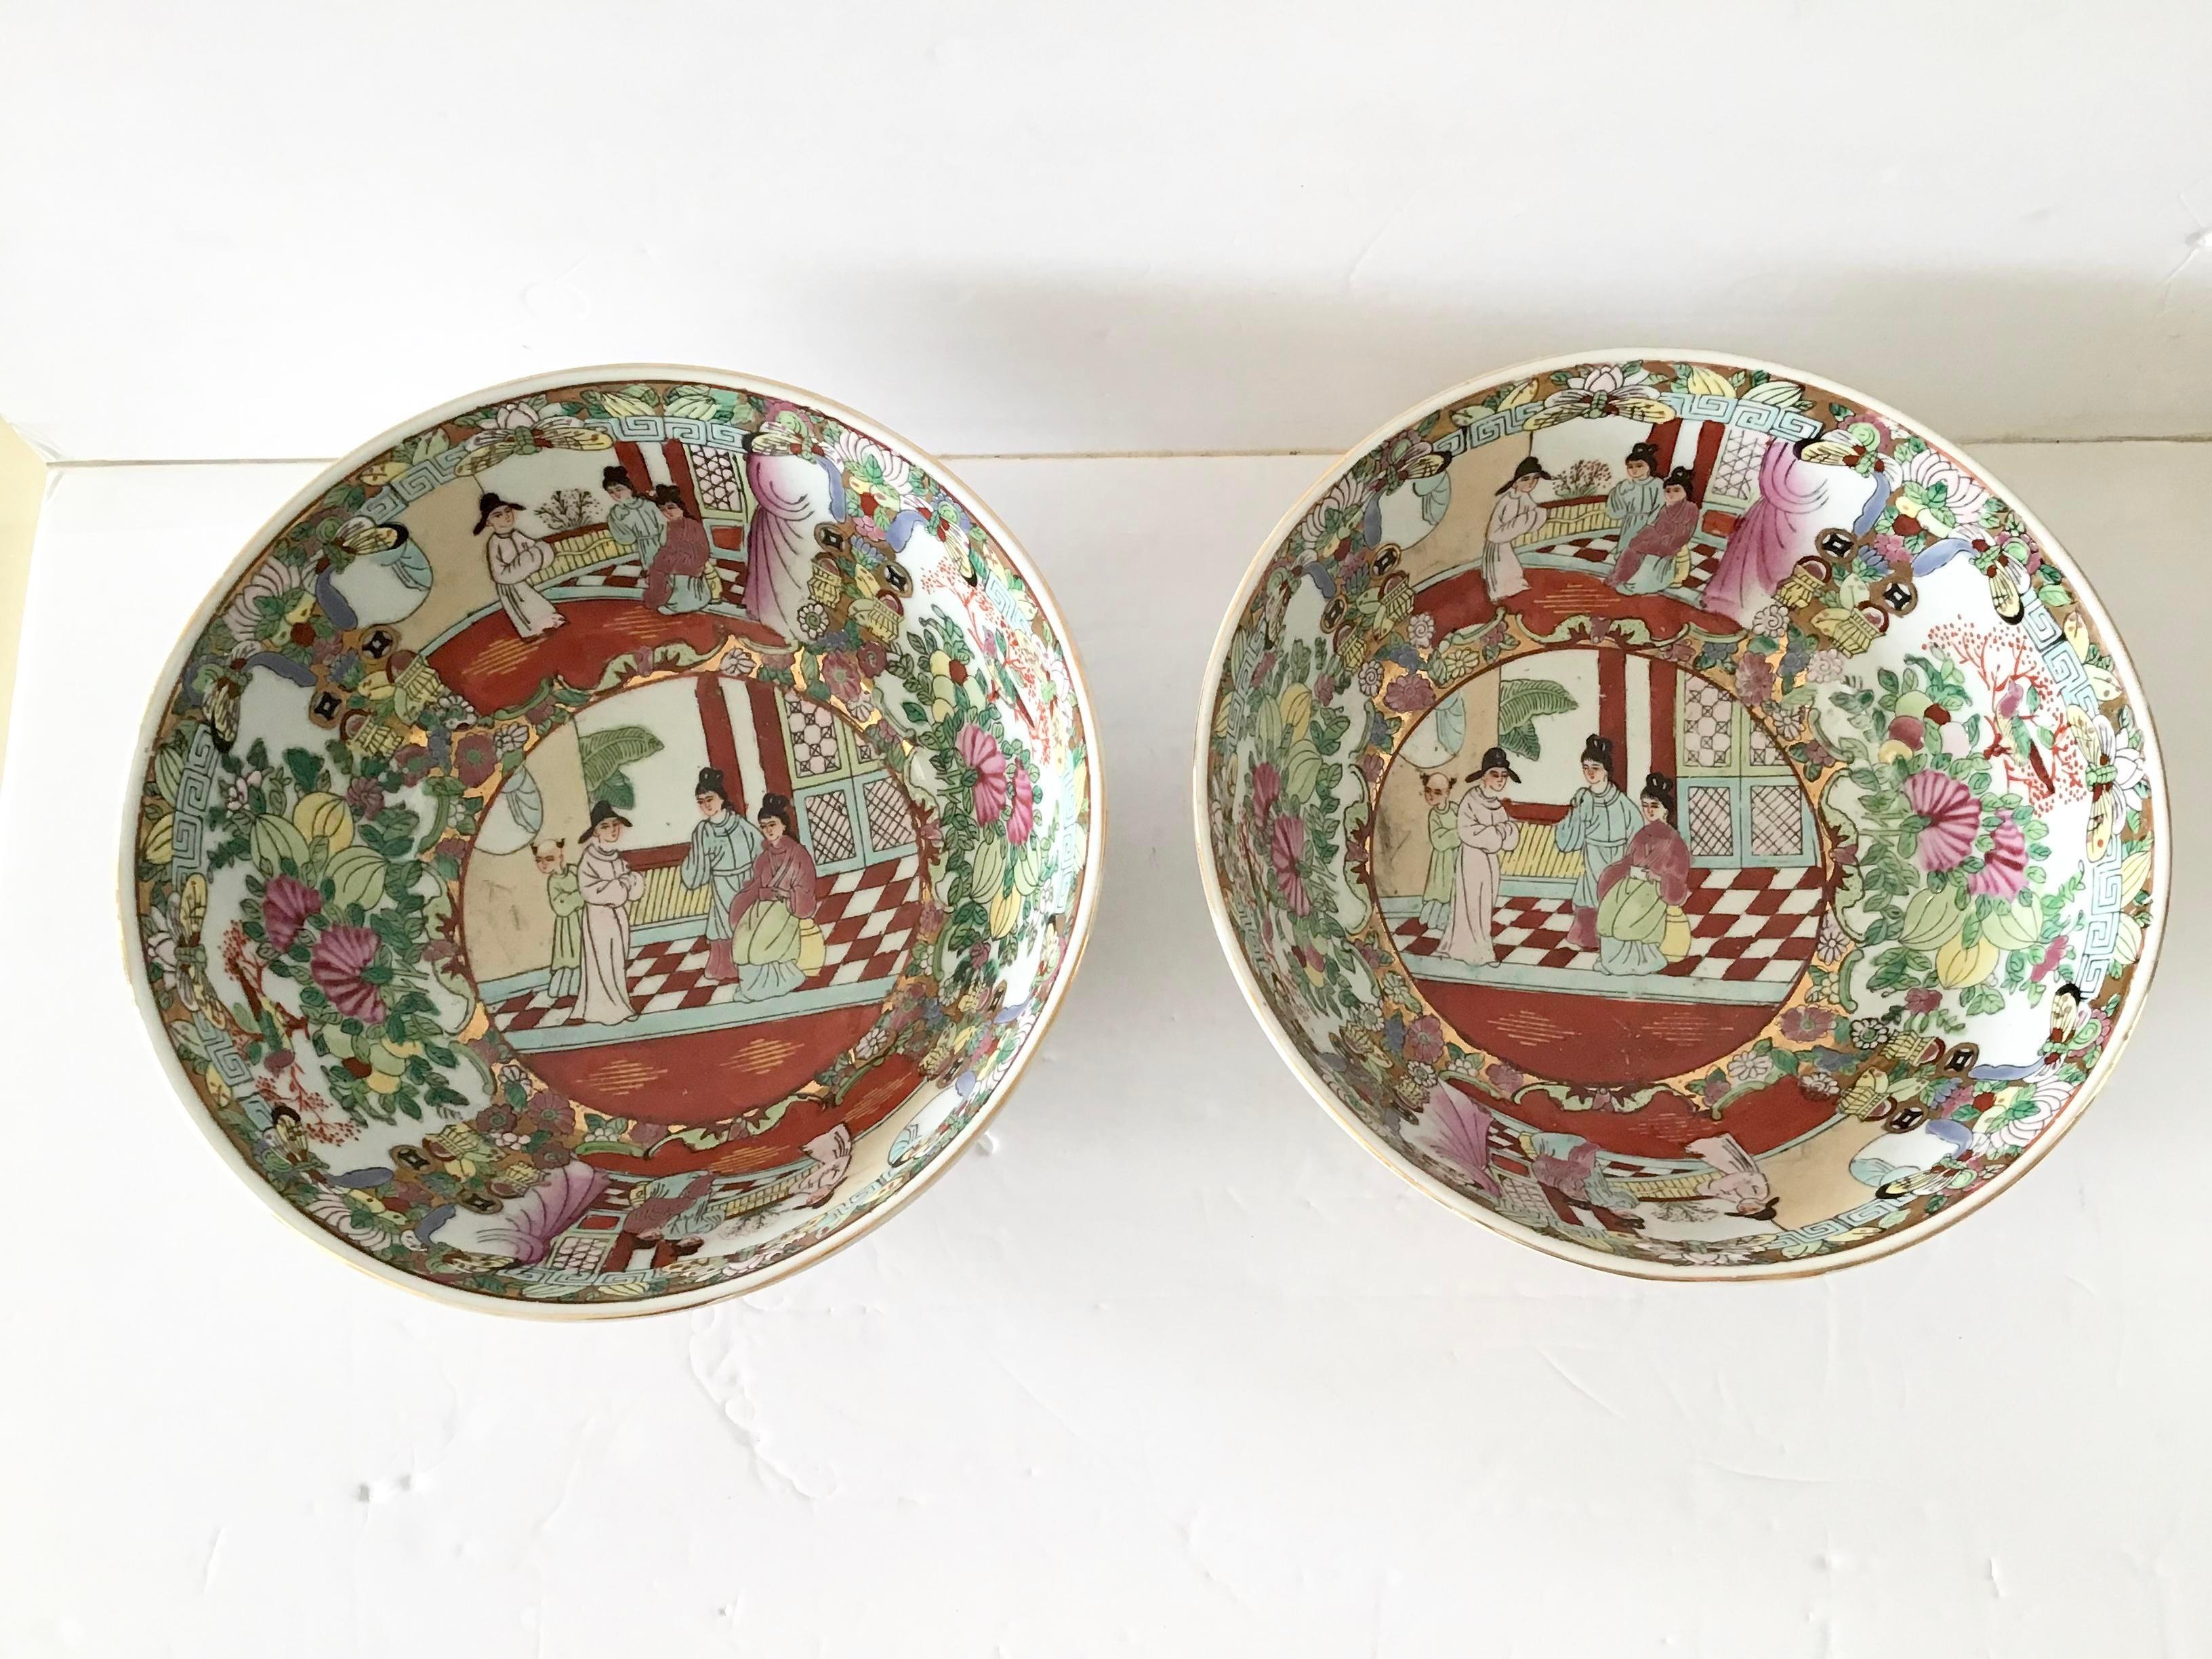 Very chic pair of Rose Medallion bowls. Add some chic style to your decor. Some 